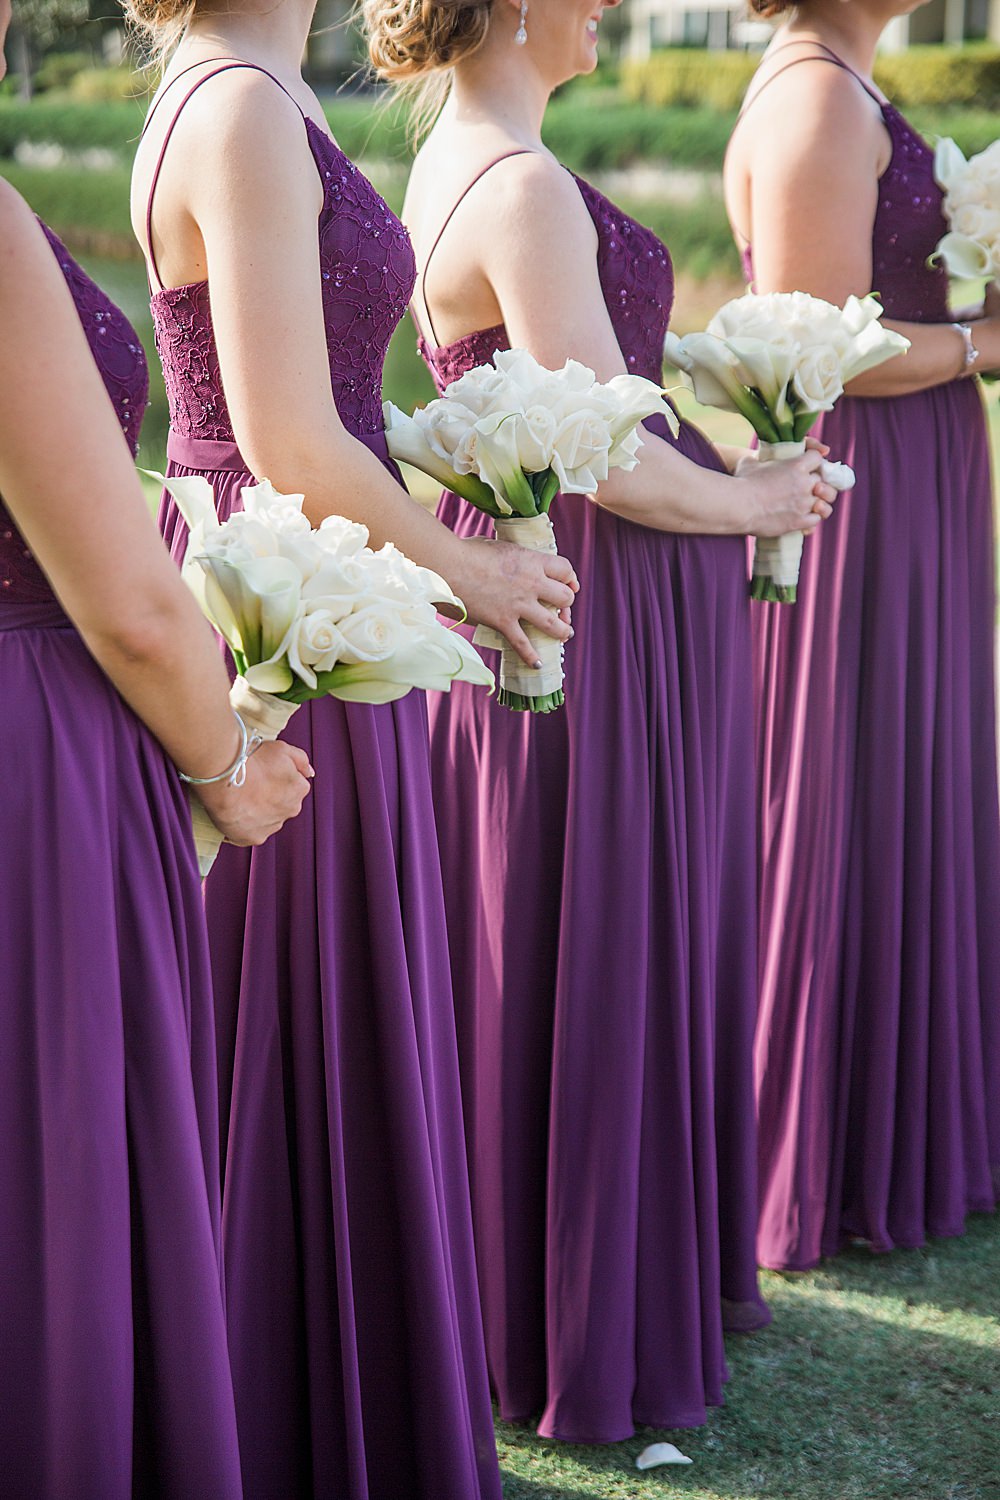 Bridesmaids in deep purple dresses holding white rose bouquets